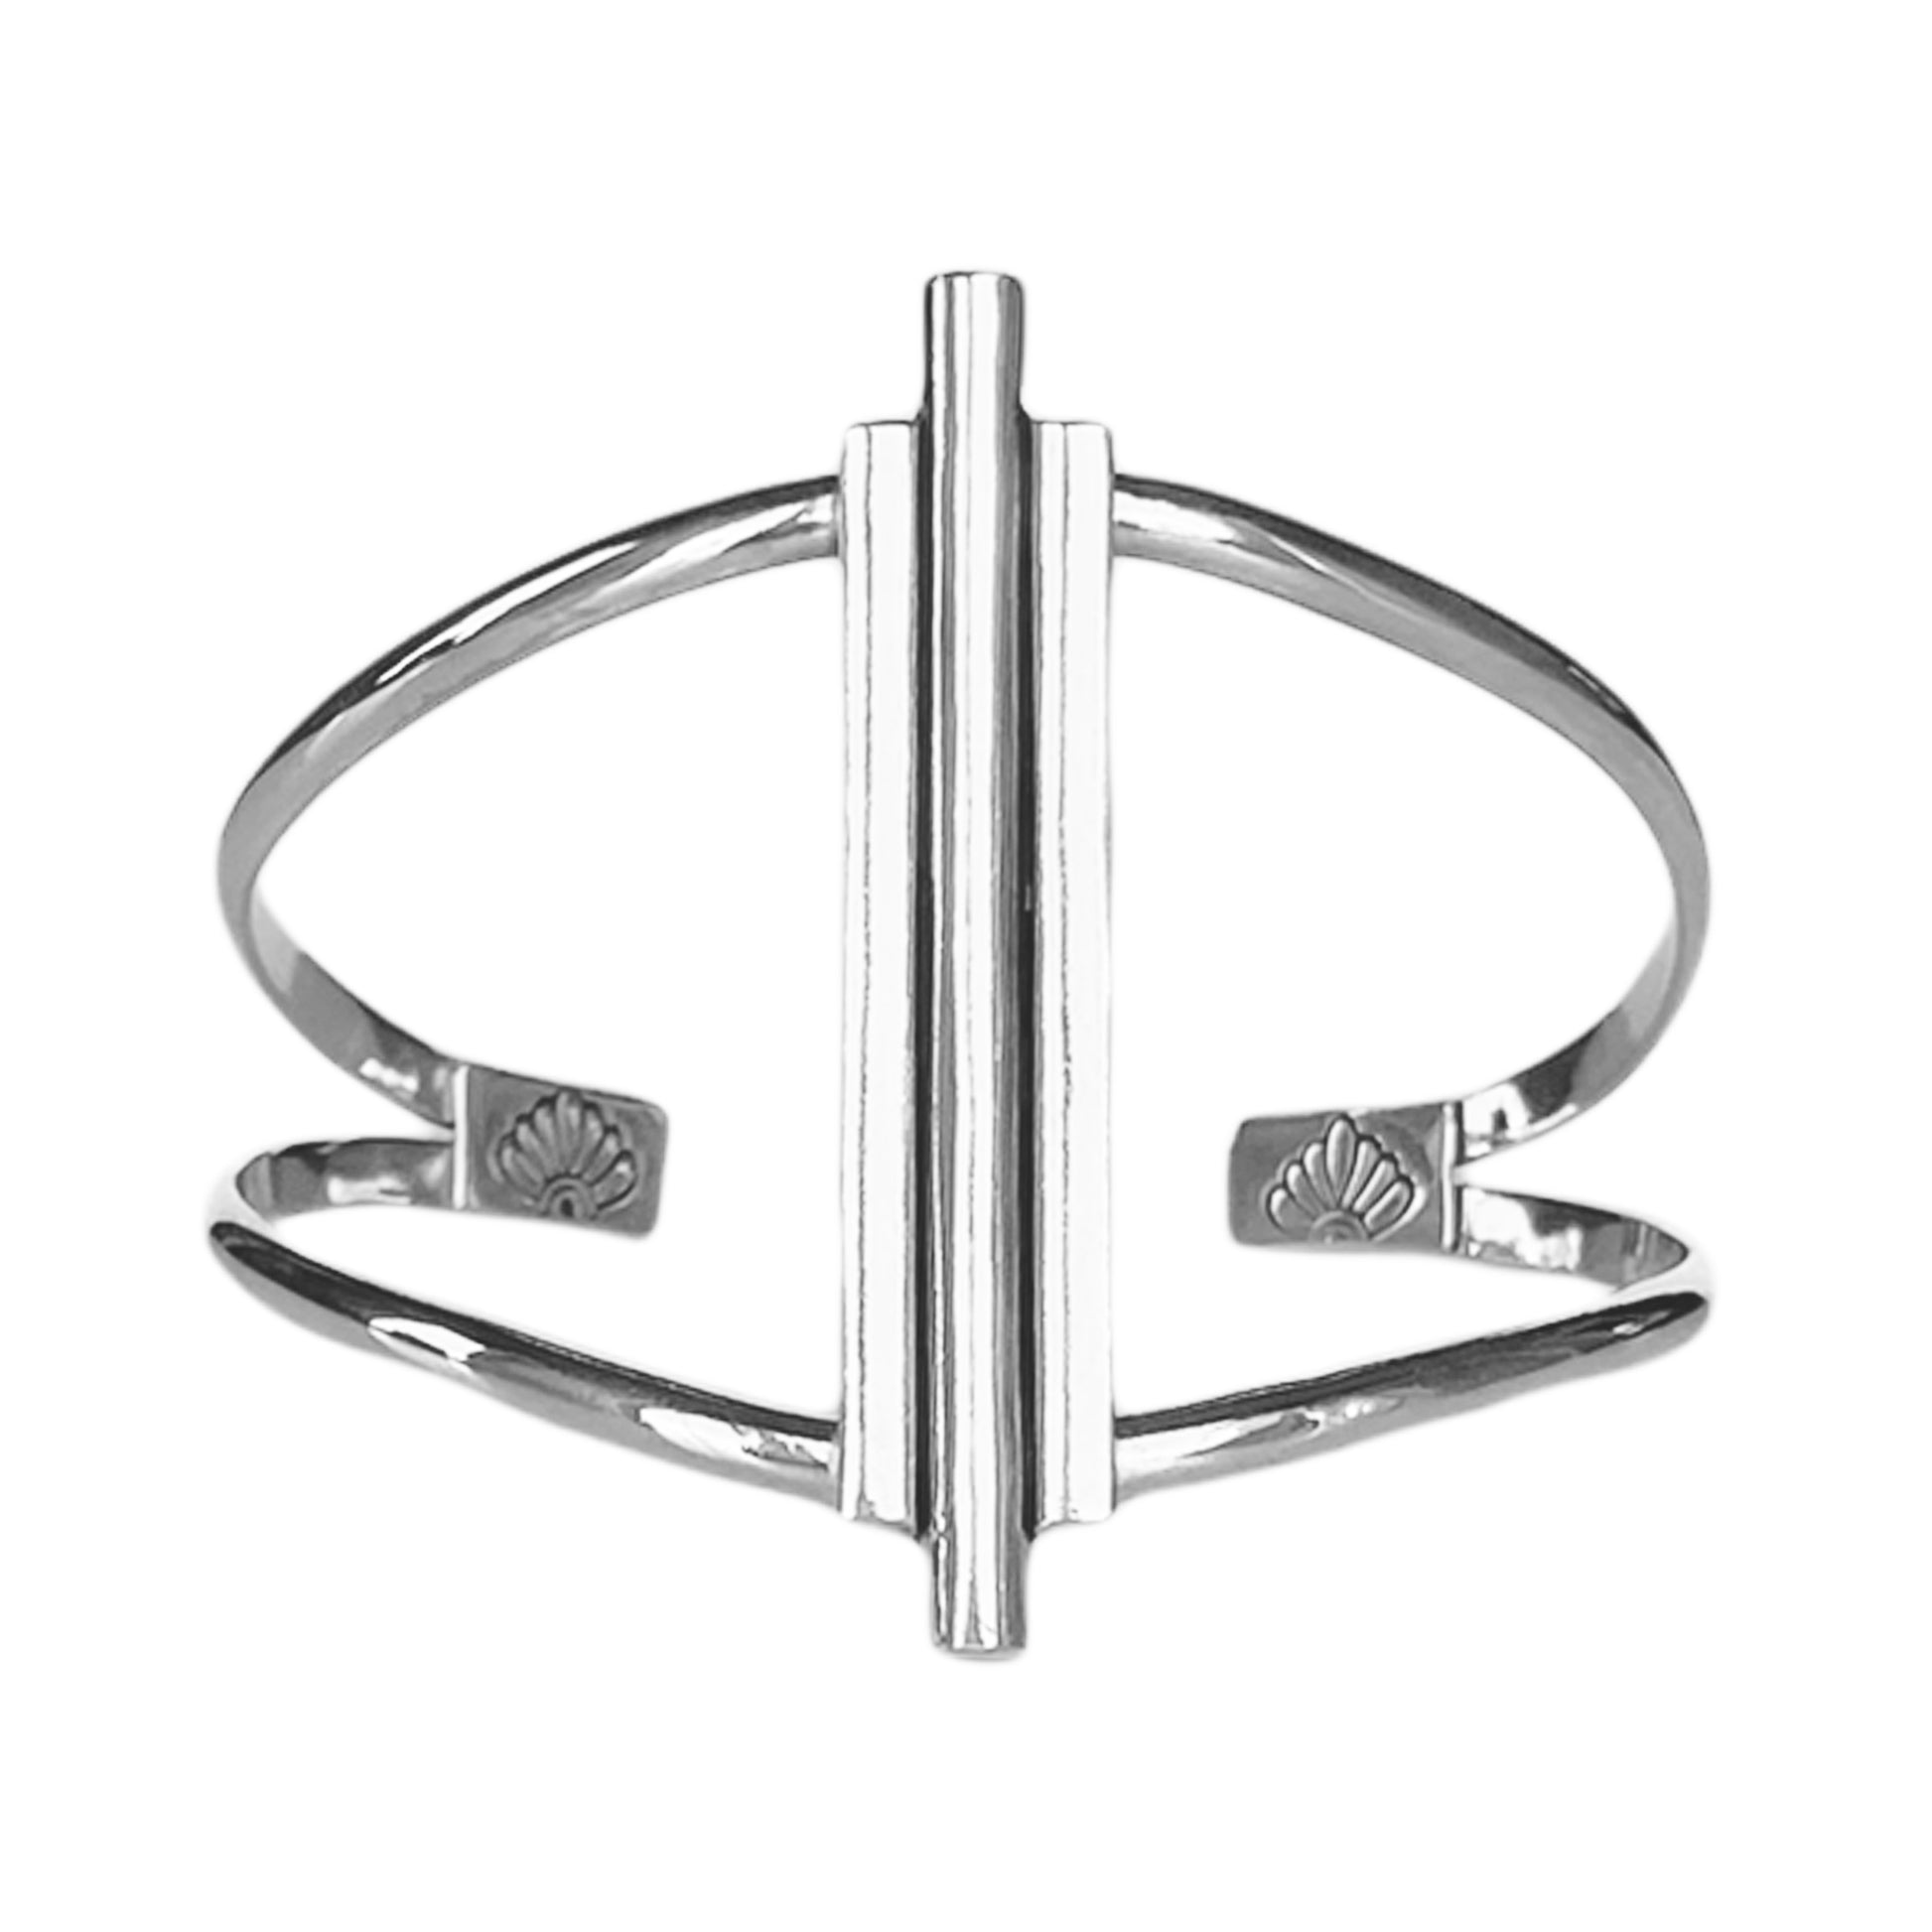 Art Deco inspired sterling silver cuff bracelet. The focal is a 3 bar design with the middle bar slightly longer than the 2 side bars. The cuff features a double band with stamped accents on the ends.